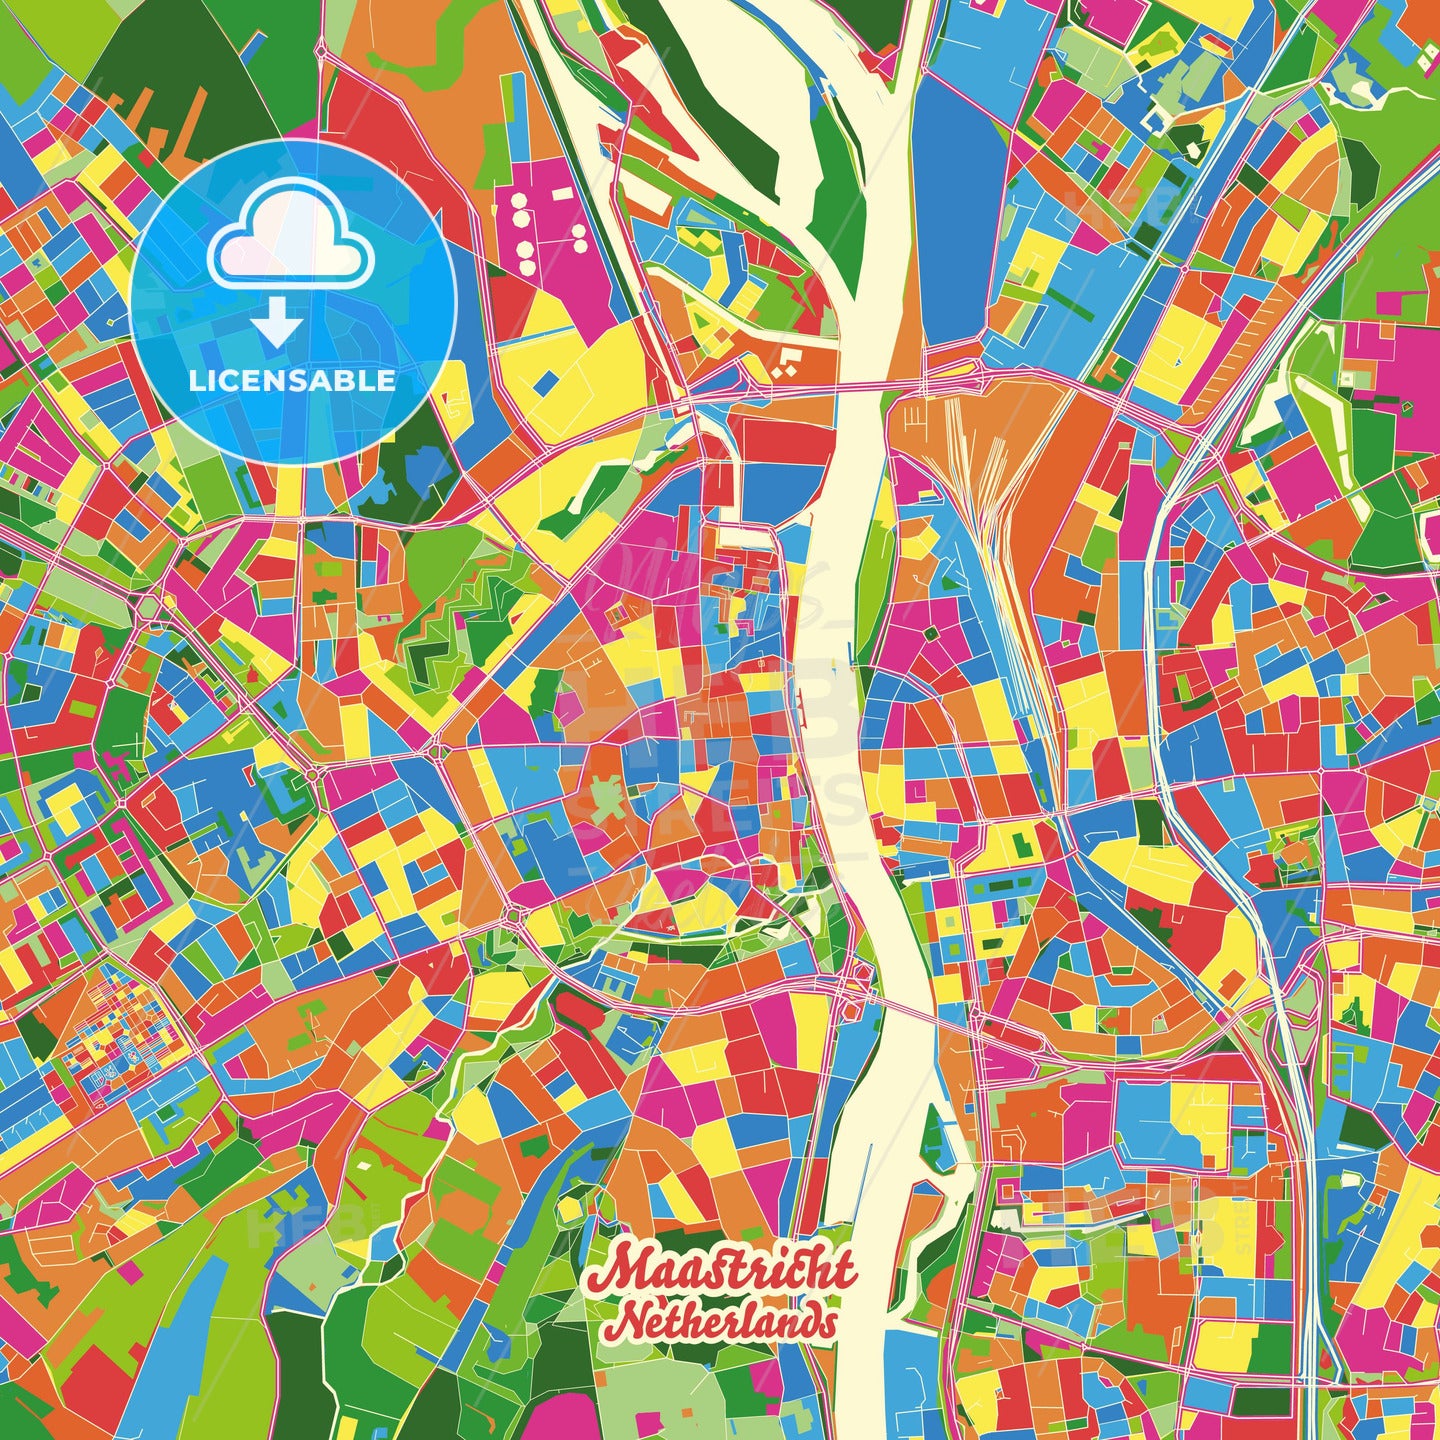 Maastricht, Netherlands Crazy Colorful Street Map Poster Template - HEBSTREITS Sketches